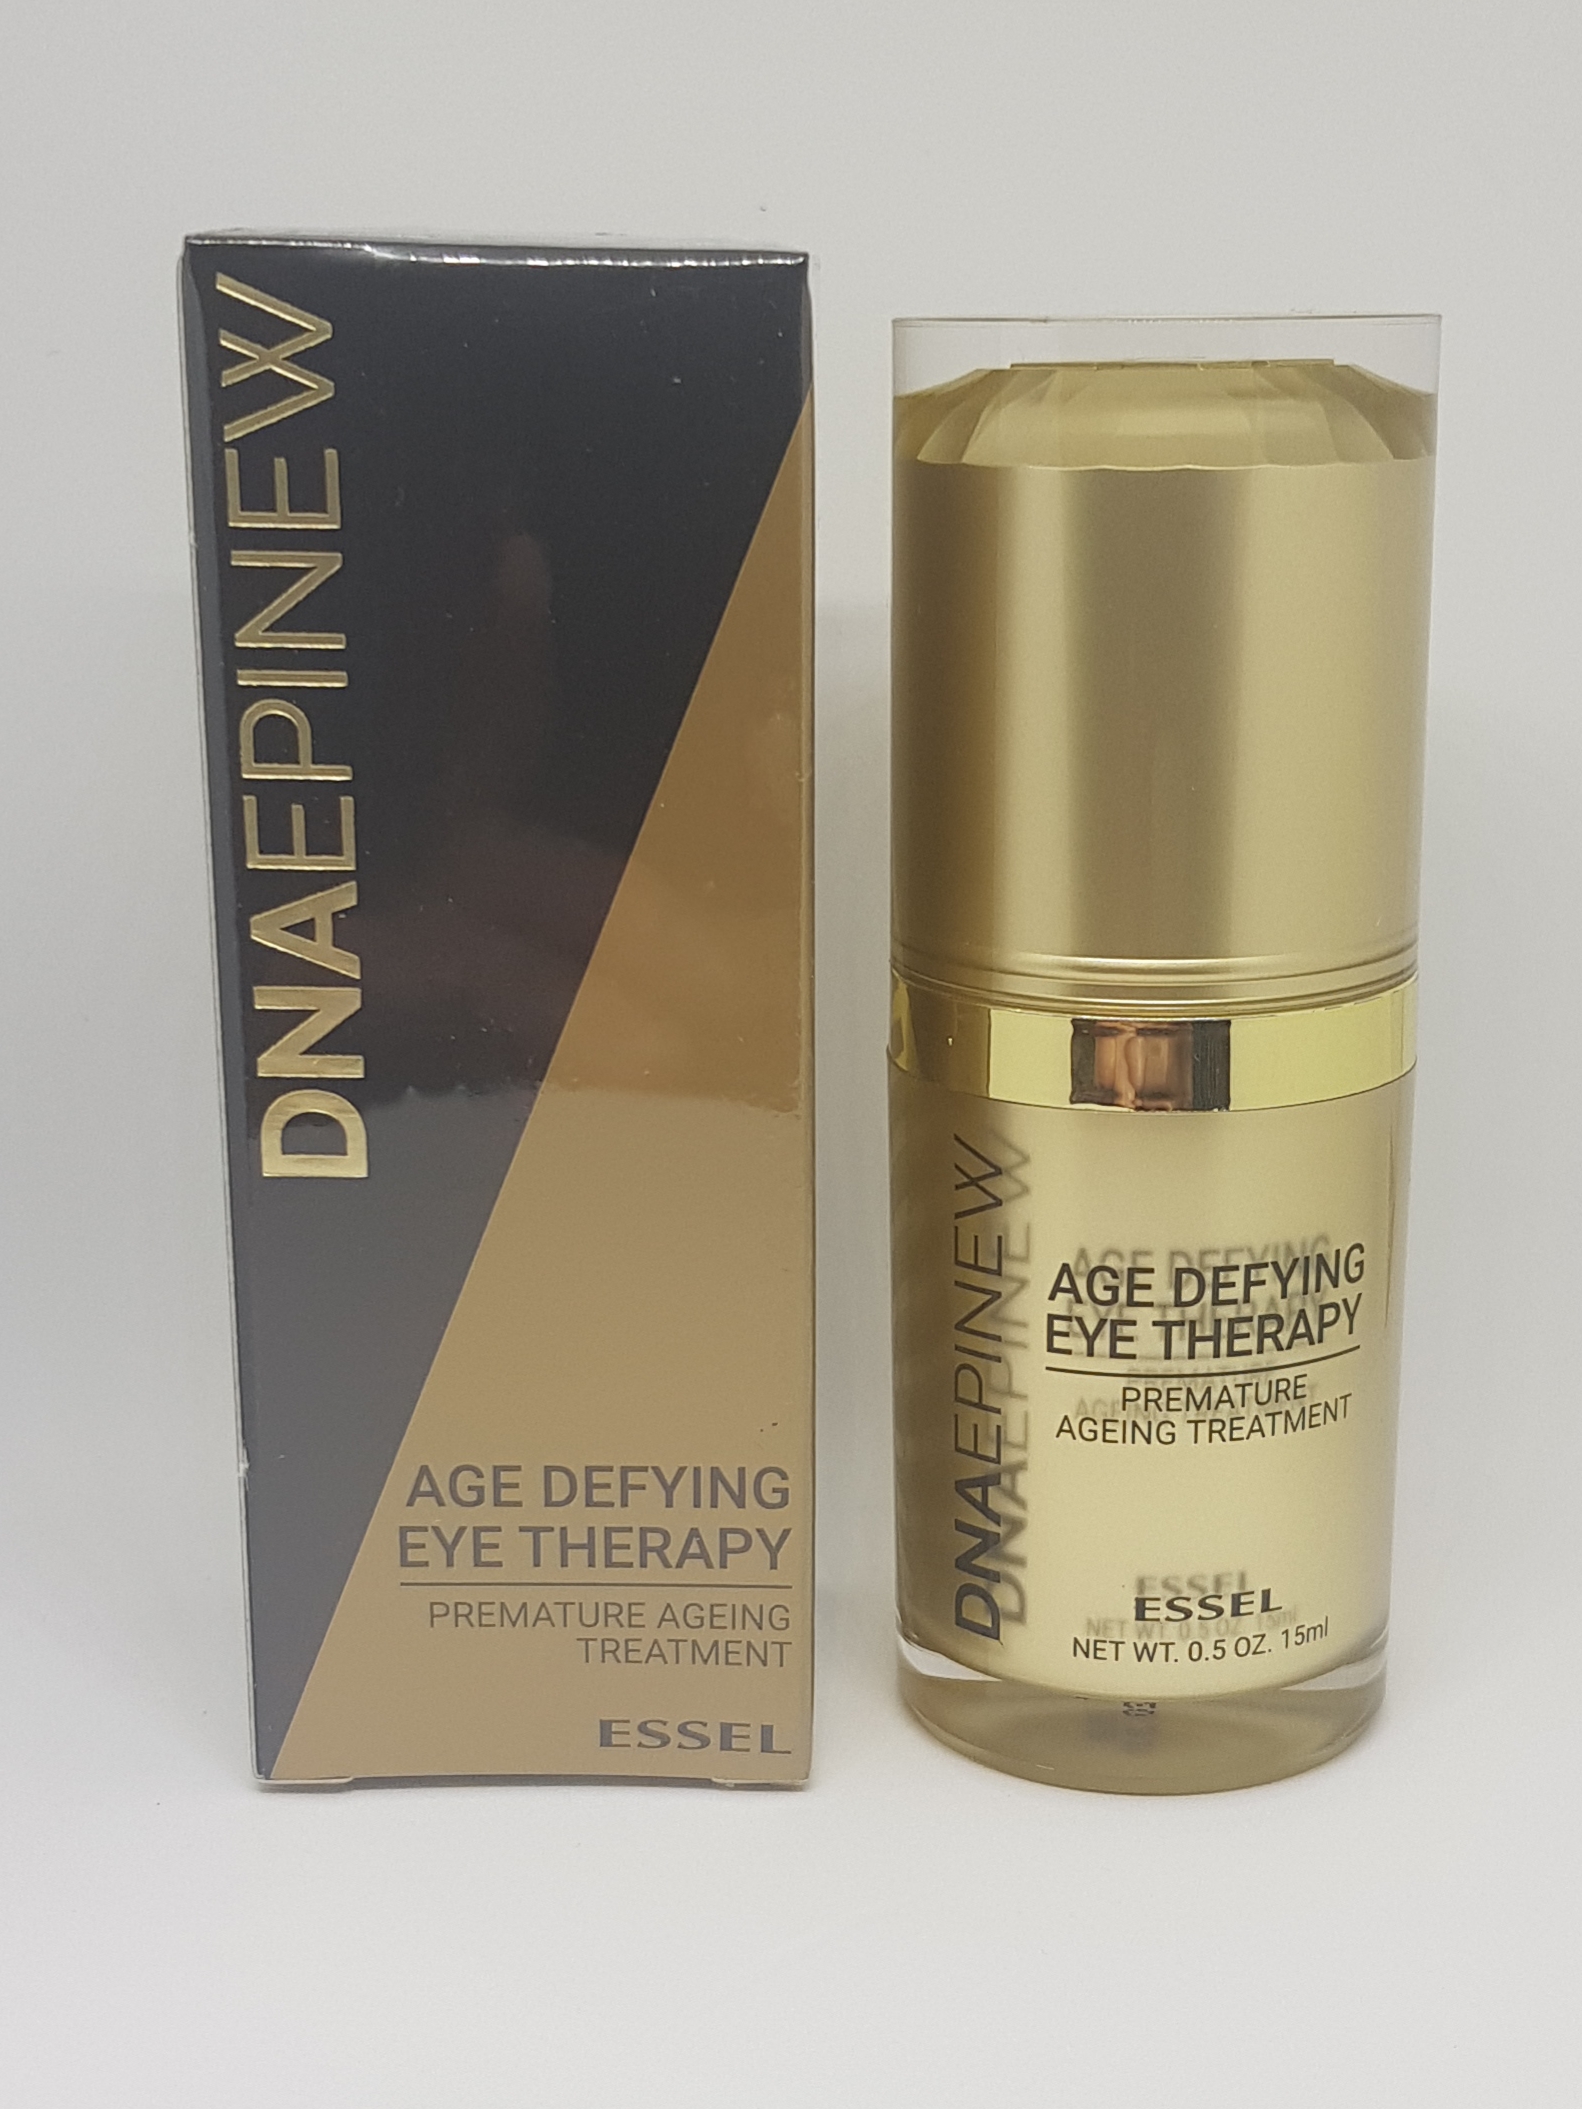 D.N.A Epinew Age Defying Eye Therapy